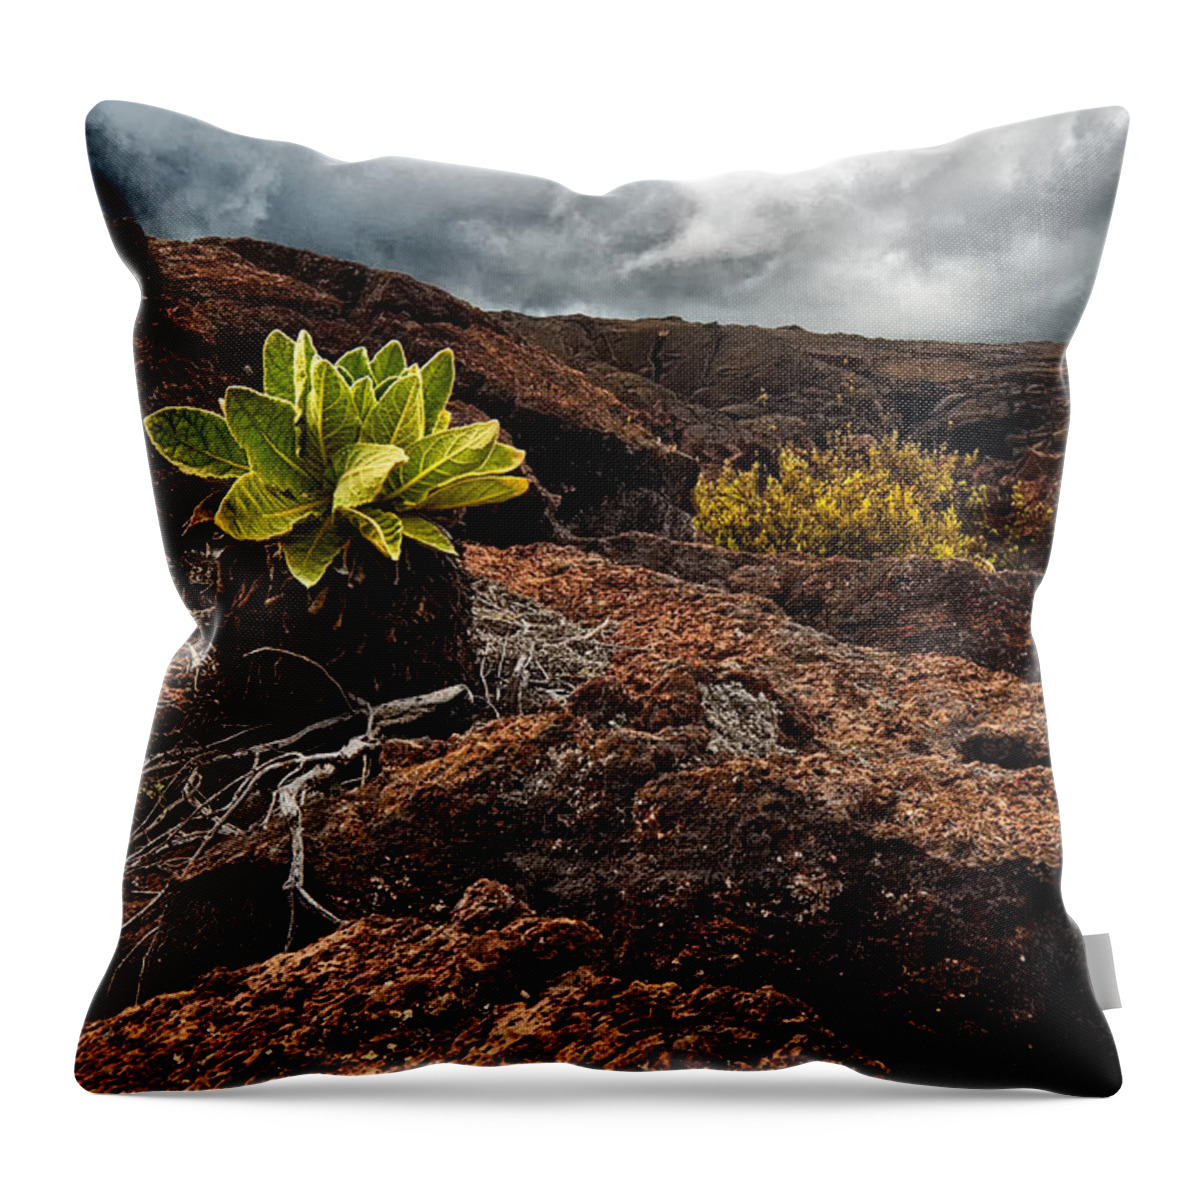 Hawaii Throw Pillow featuring the photograph A Hard Existence by Christopher Holmes